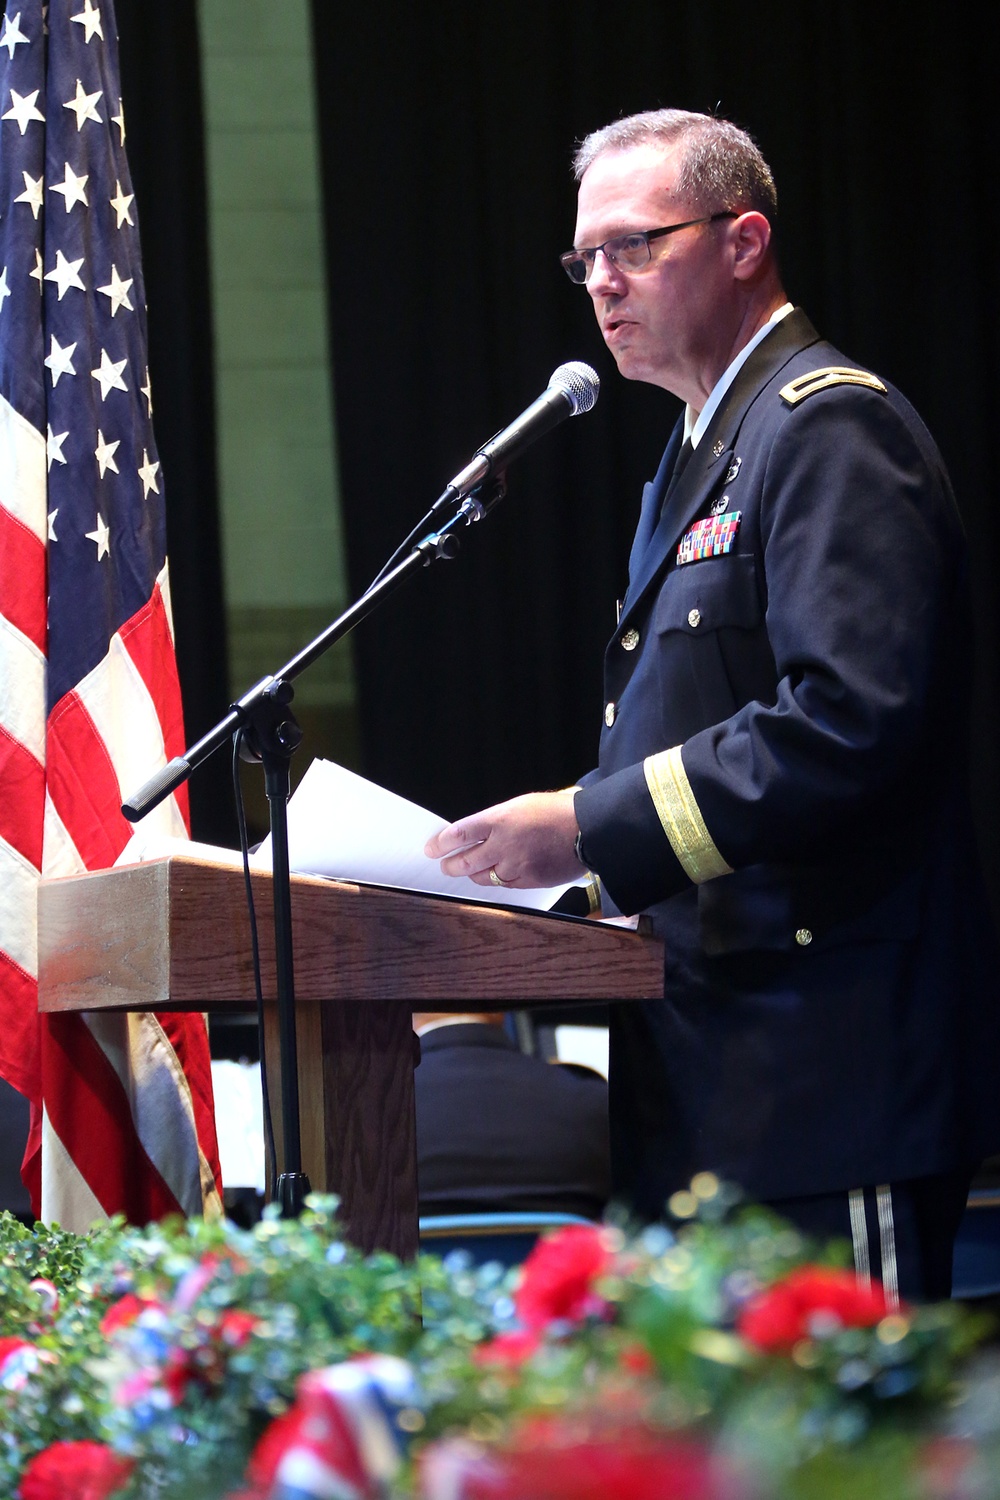 Local Army Reserve general speaks on Memorial Day